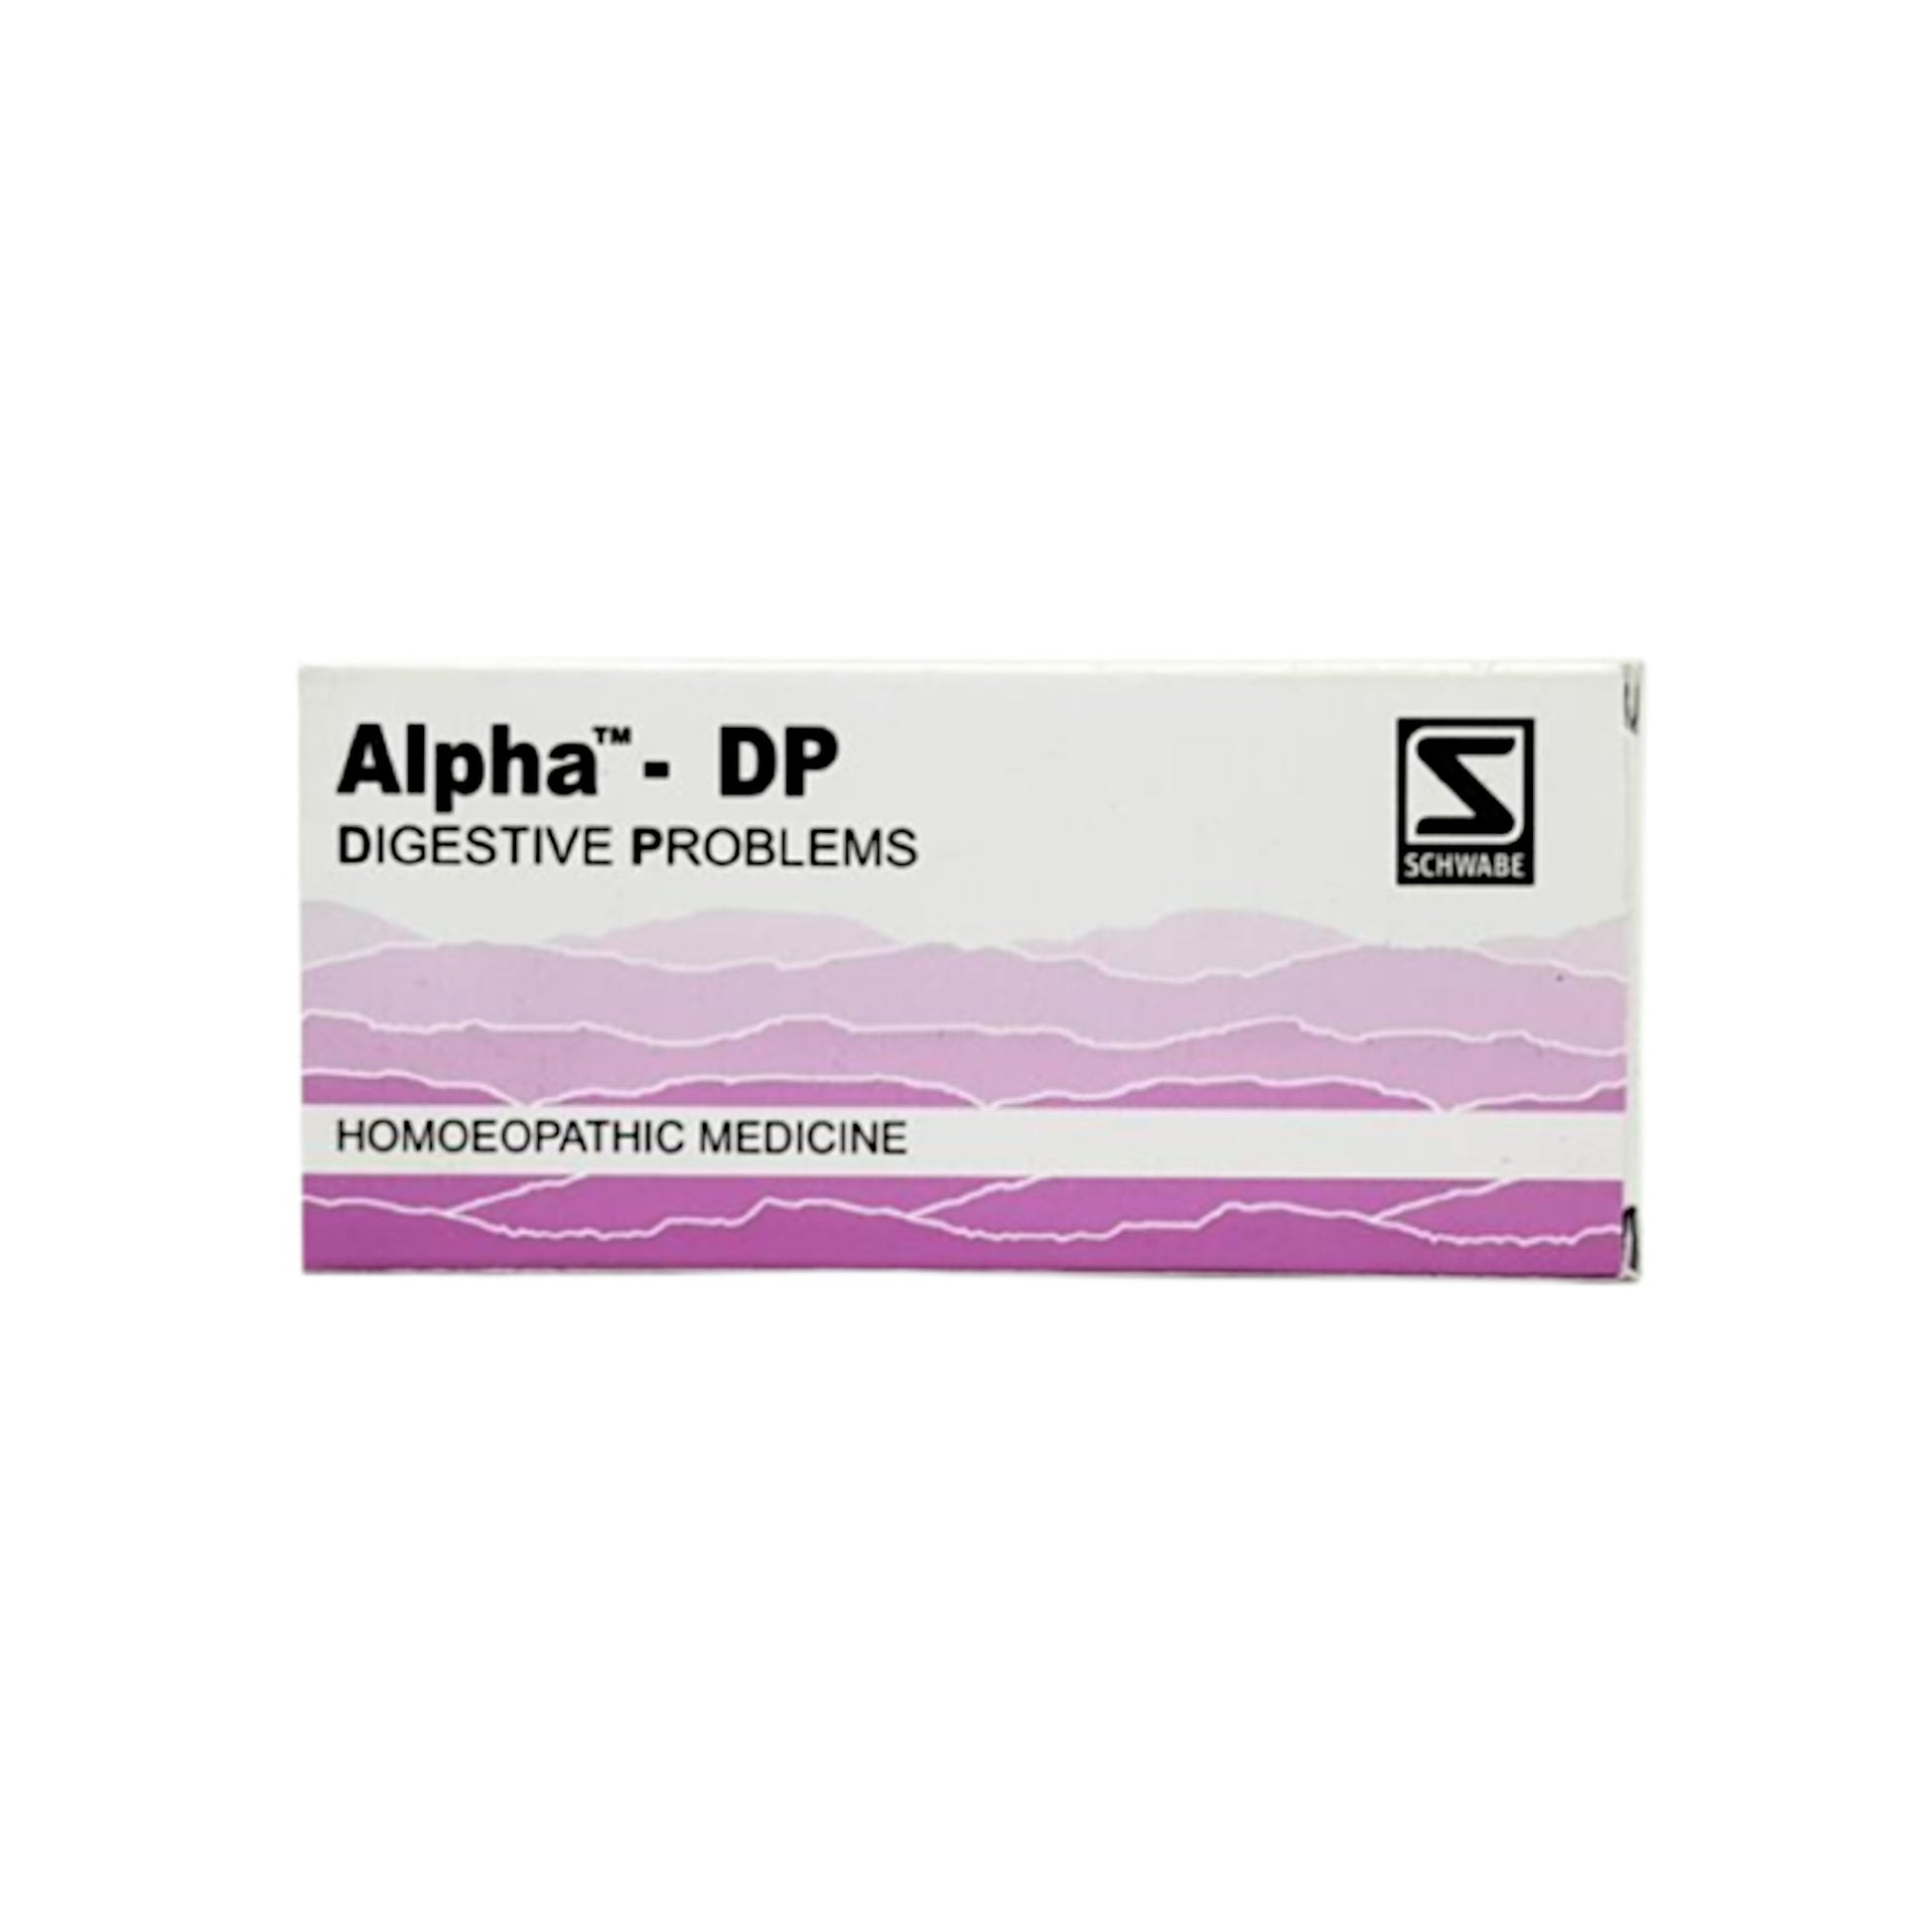 Image Dr. Willmar Schwabe Homeopathy - Alpha-DP 40 Tablets - Homeopathic remedy for digestive discomfort and diarrhea relief.